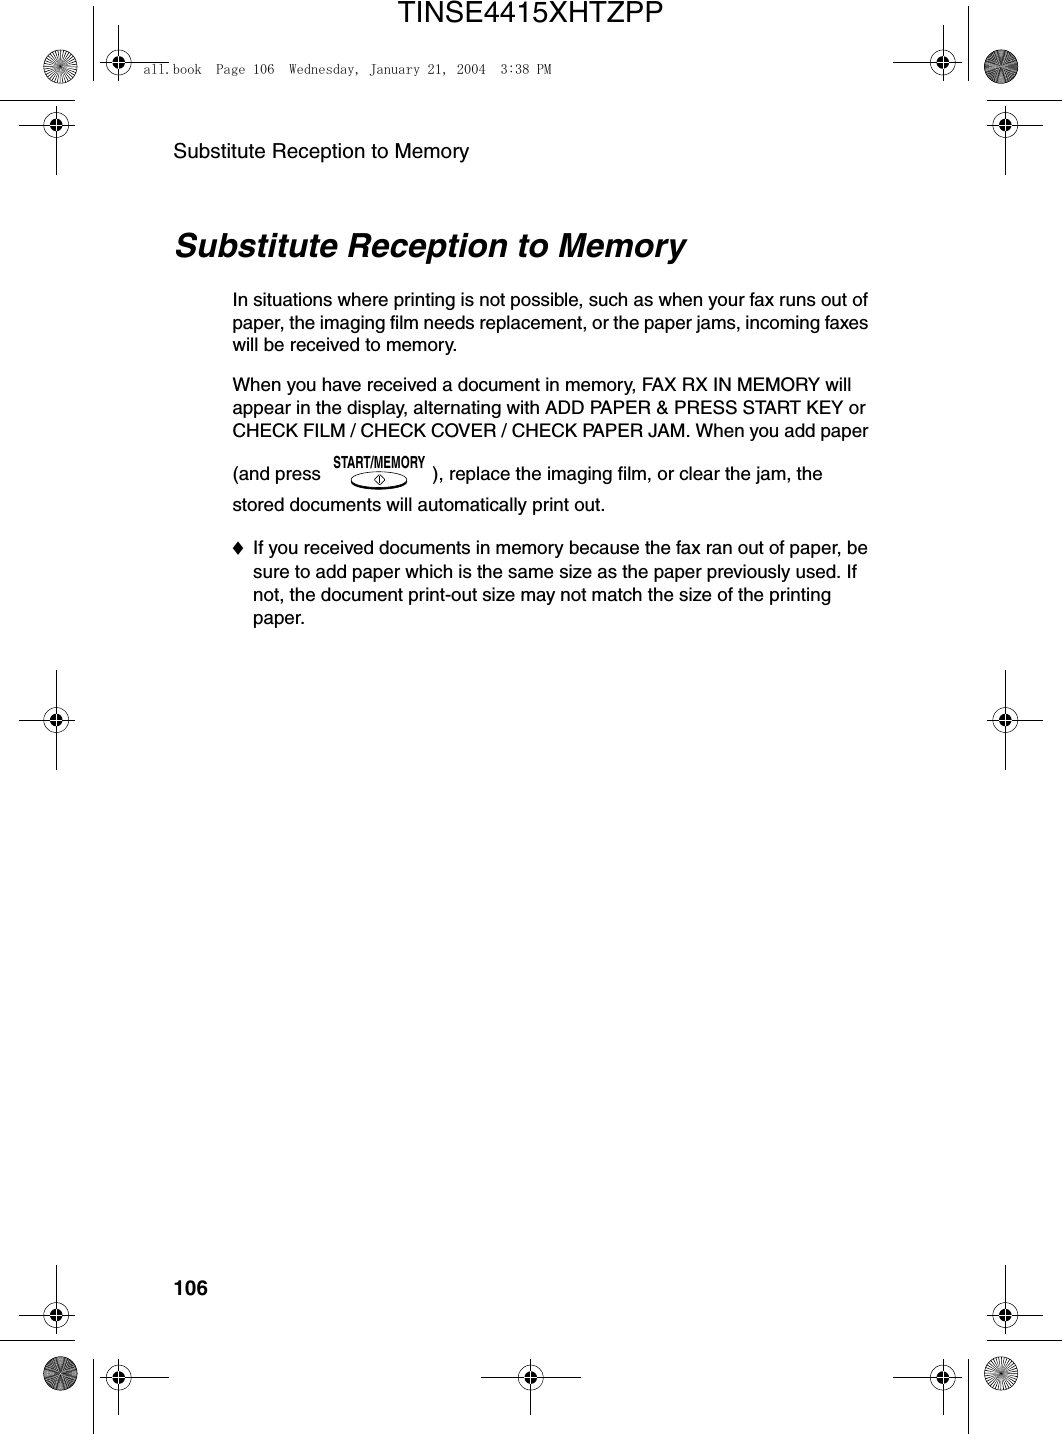 Substitute Reception to Memory106Substitute Reception to MemoryIn situations where printing is not possible, such as when your fax runs out of paper, the imaging film needs replacement, or the paper jams, incoming faxes will be received to memory.When you have received a document in memory, FAX RX IN MEMORY will appear in the display, alternating with ADD PAPER &amp; PRESS START KEY or CHECK FILM / CHECK COVER / CHECK PAPER JAM. When you add paper (and press  ), replace the imaging film, or clear the jam, the stored documents will automatically print out.♦If you received documents in memory because the fax ran out of paper, be sure to add paper which is the same size as the paper previously used. If not, the document print-out size may not match the size of the printing paper.START/MEMORYall.book  Page 106  Wednesday, January 21, 2004  3:38 PMTINSE4415XHTZPP